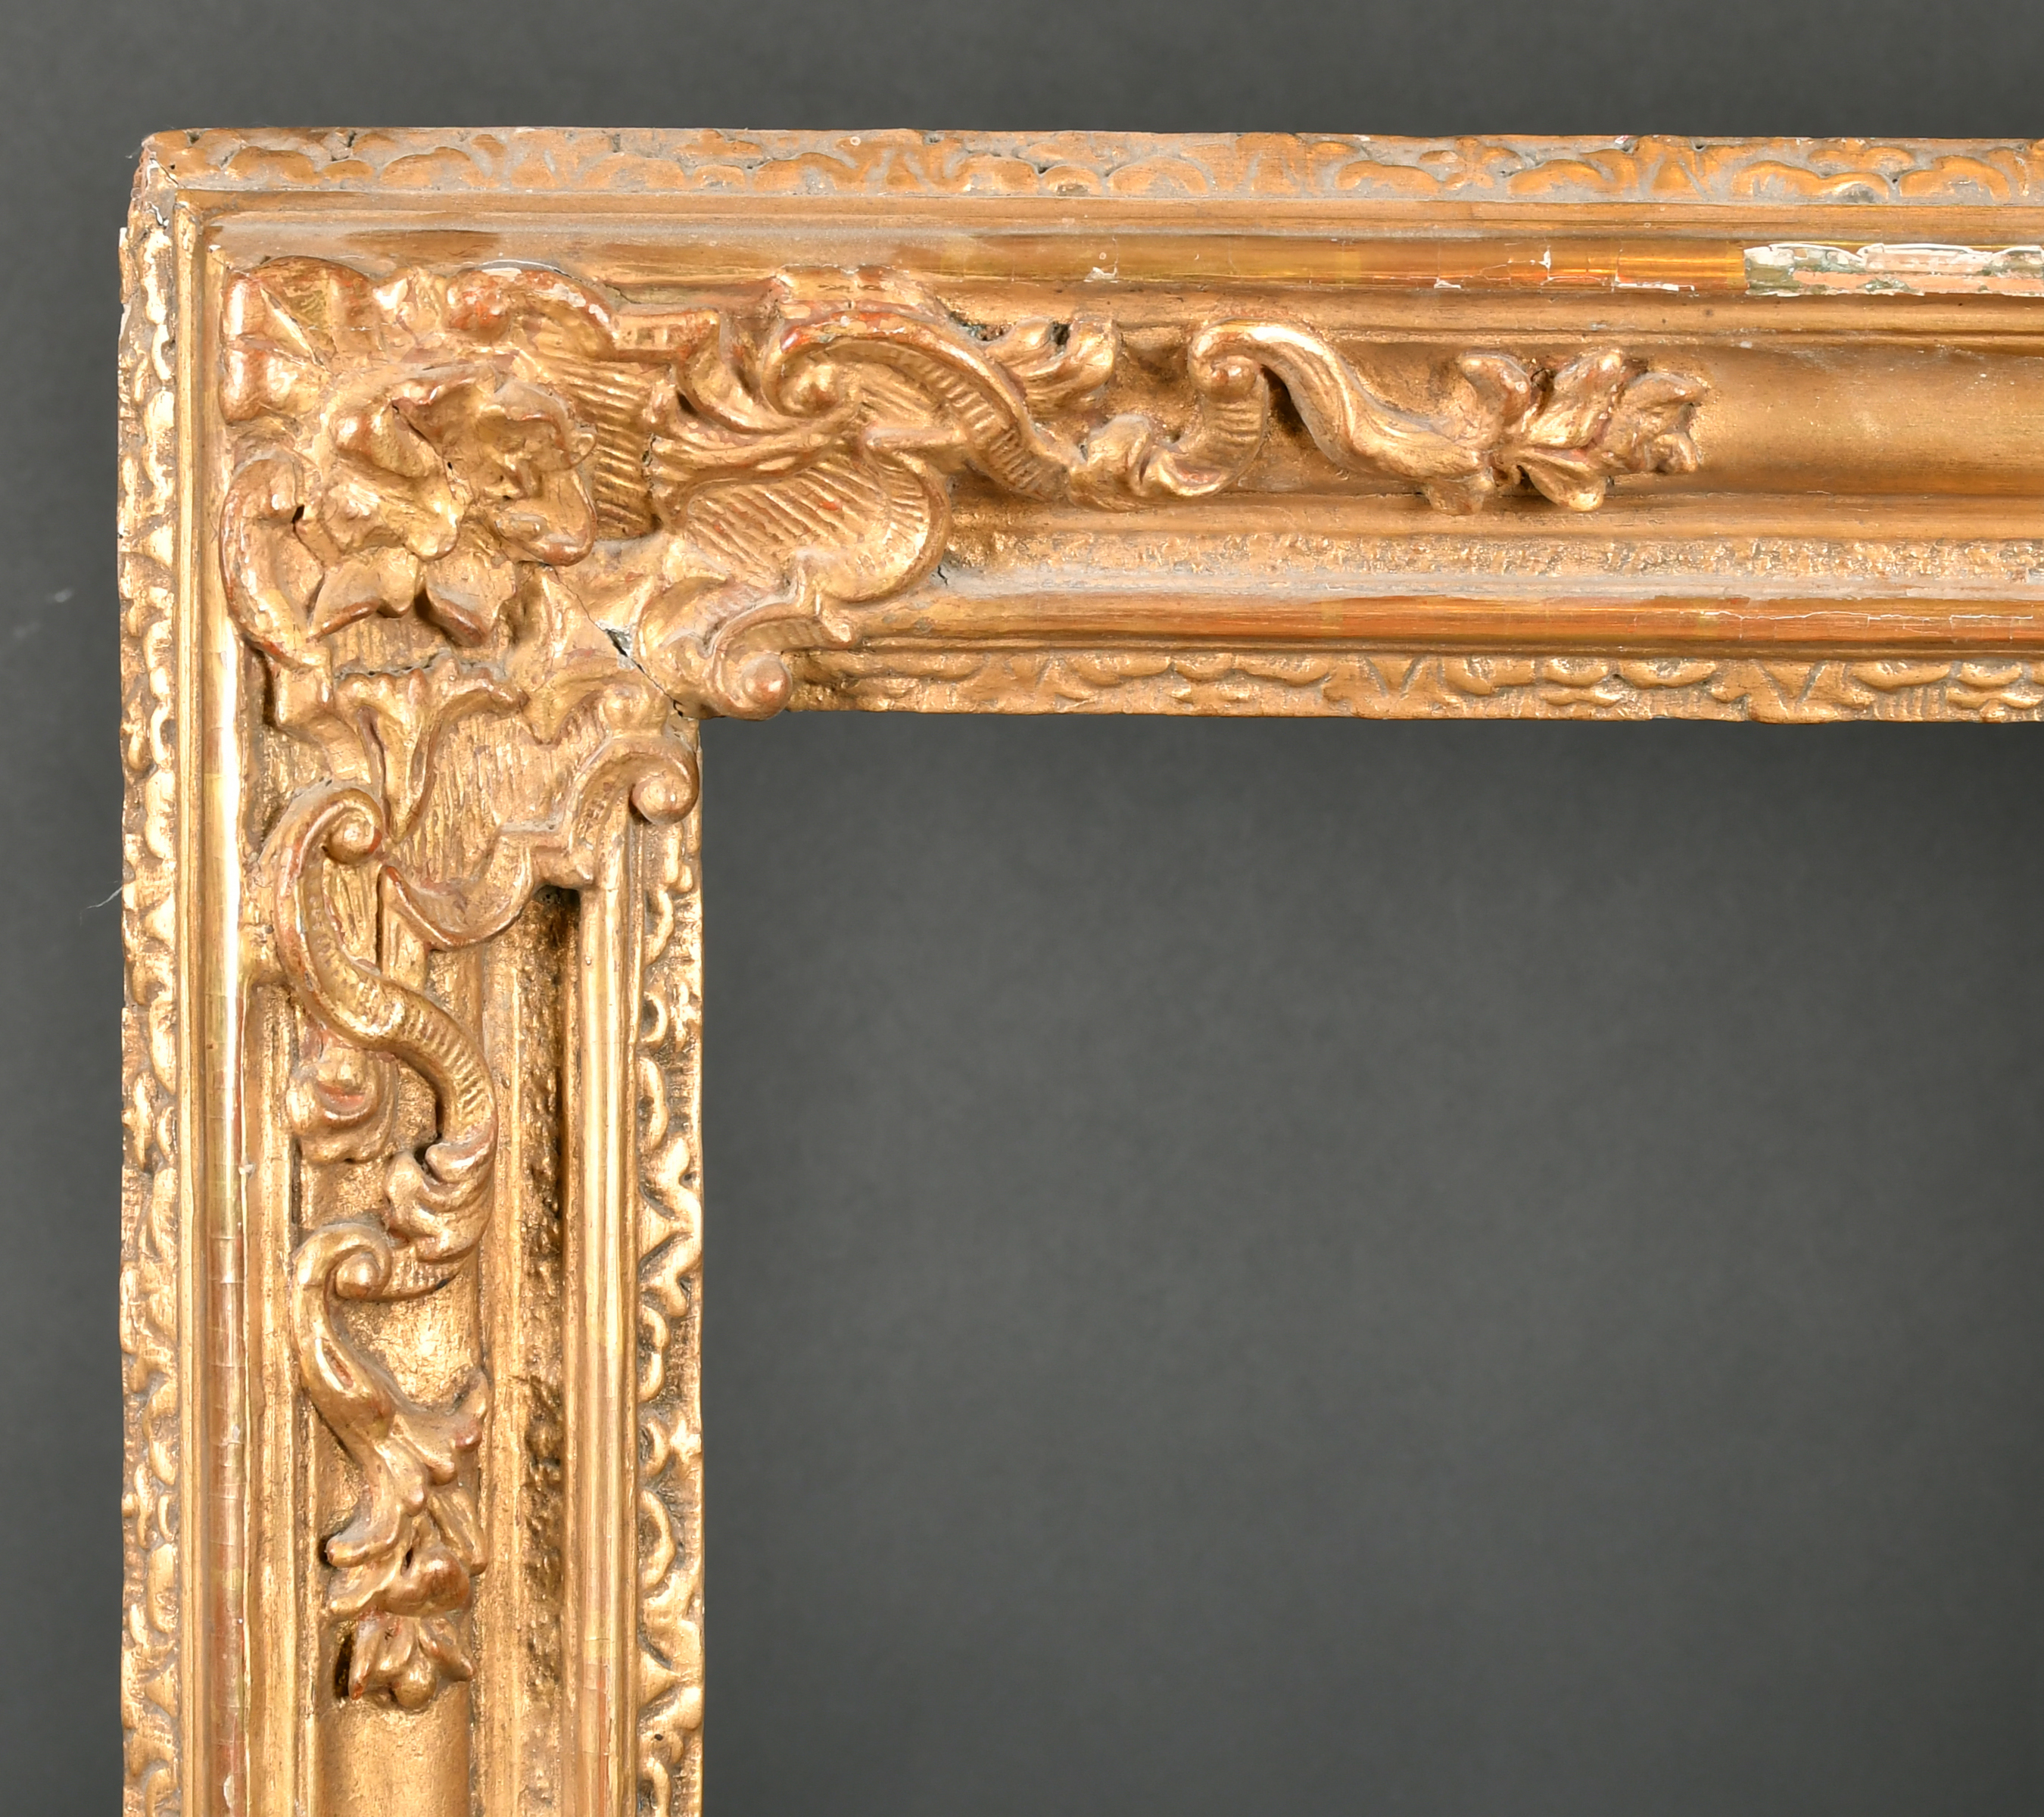 18th Century French School. A Carved Giltwood Frame, rebate 41.5" x 28" (105.4 x 71.1cm)